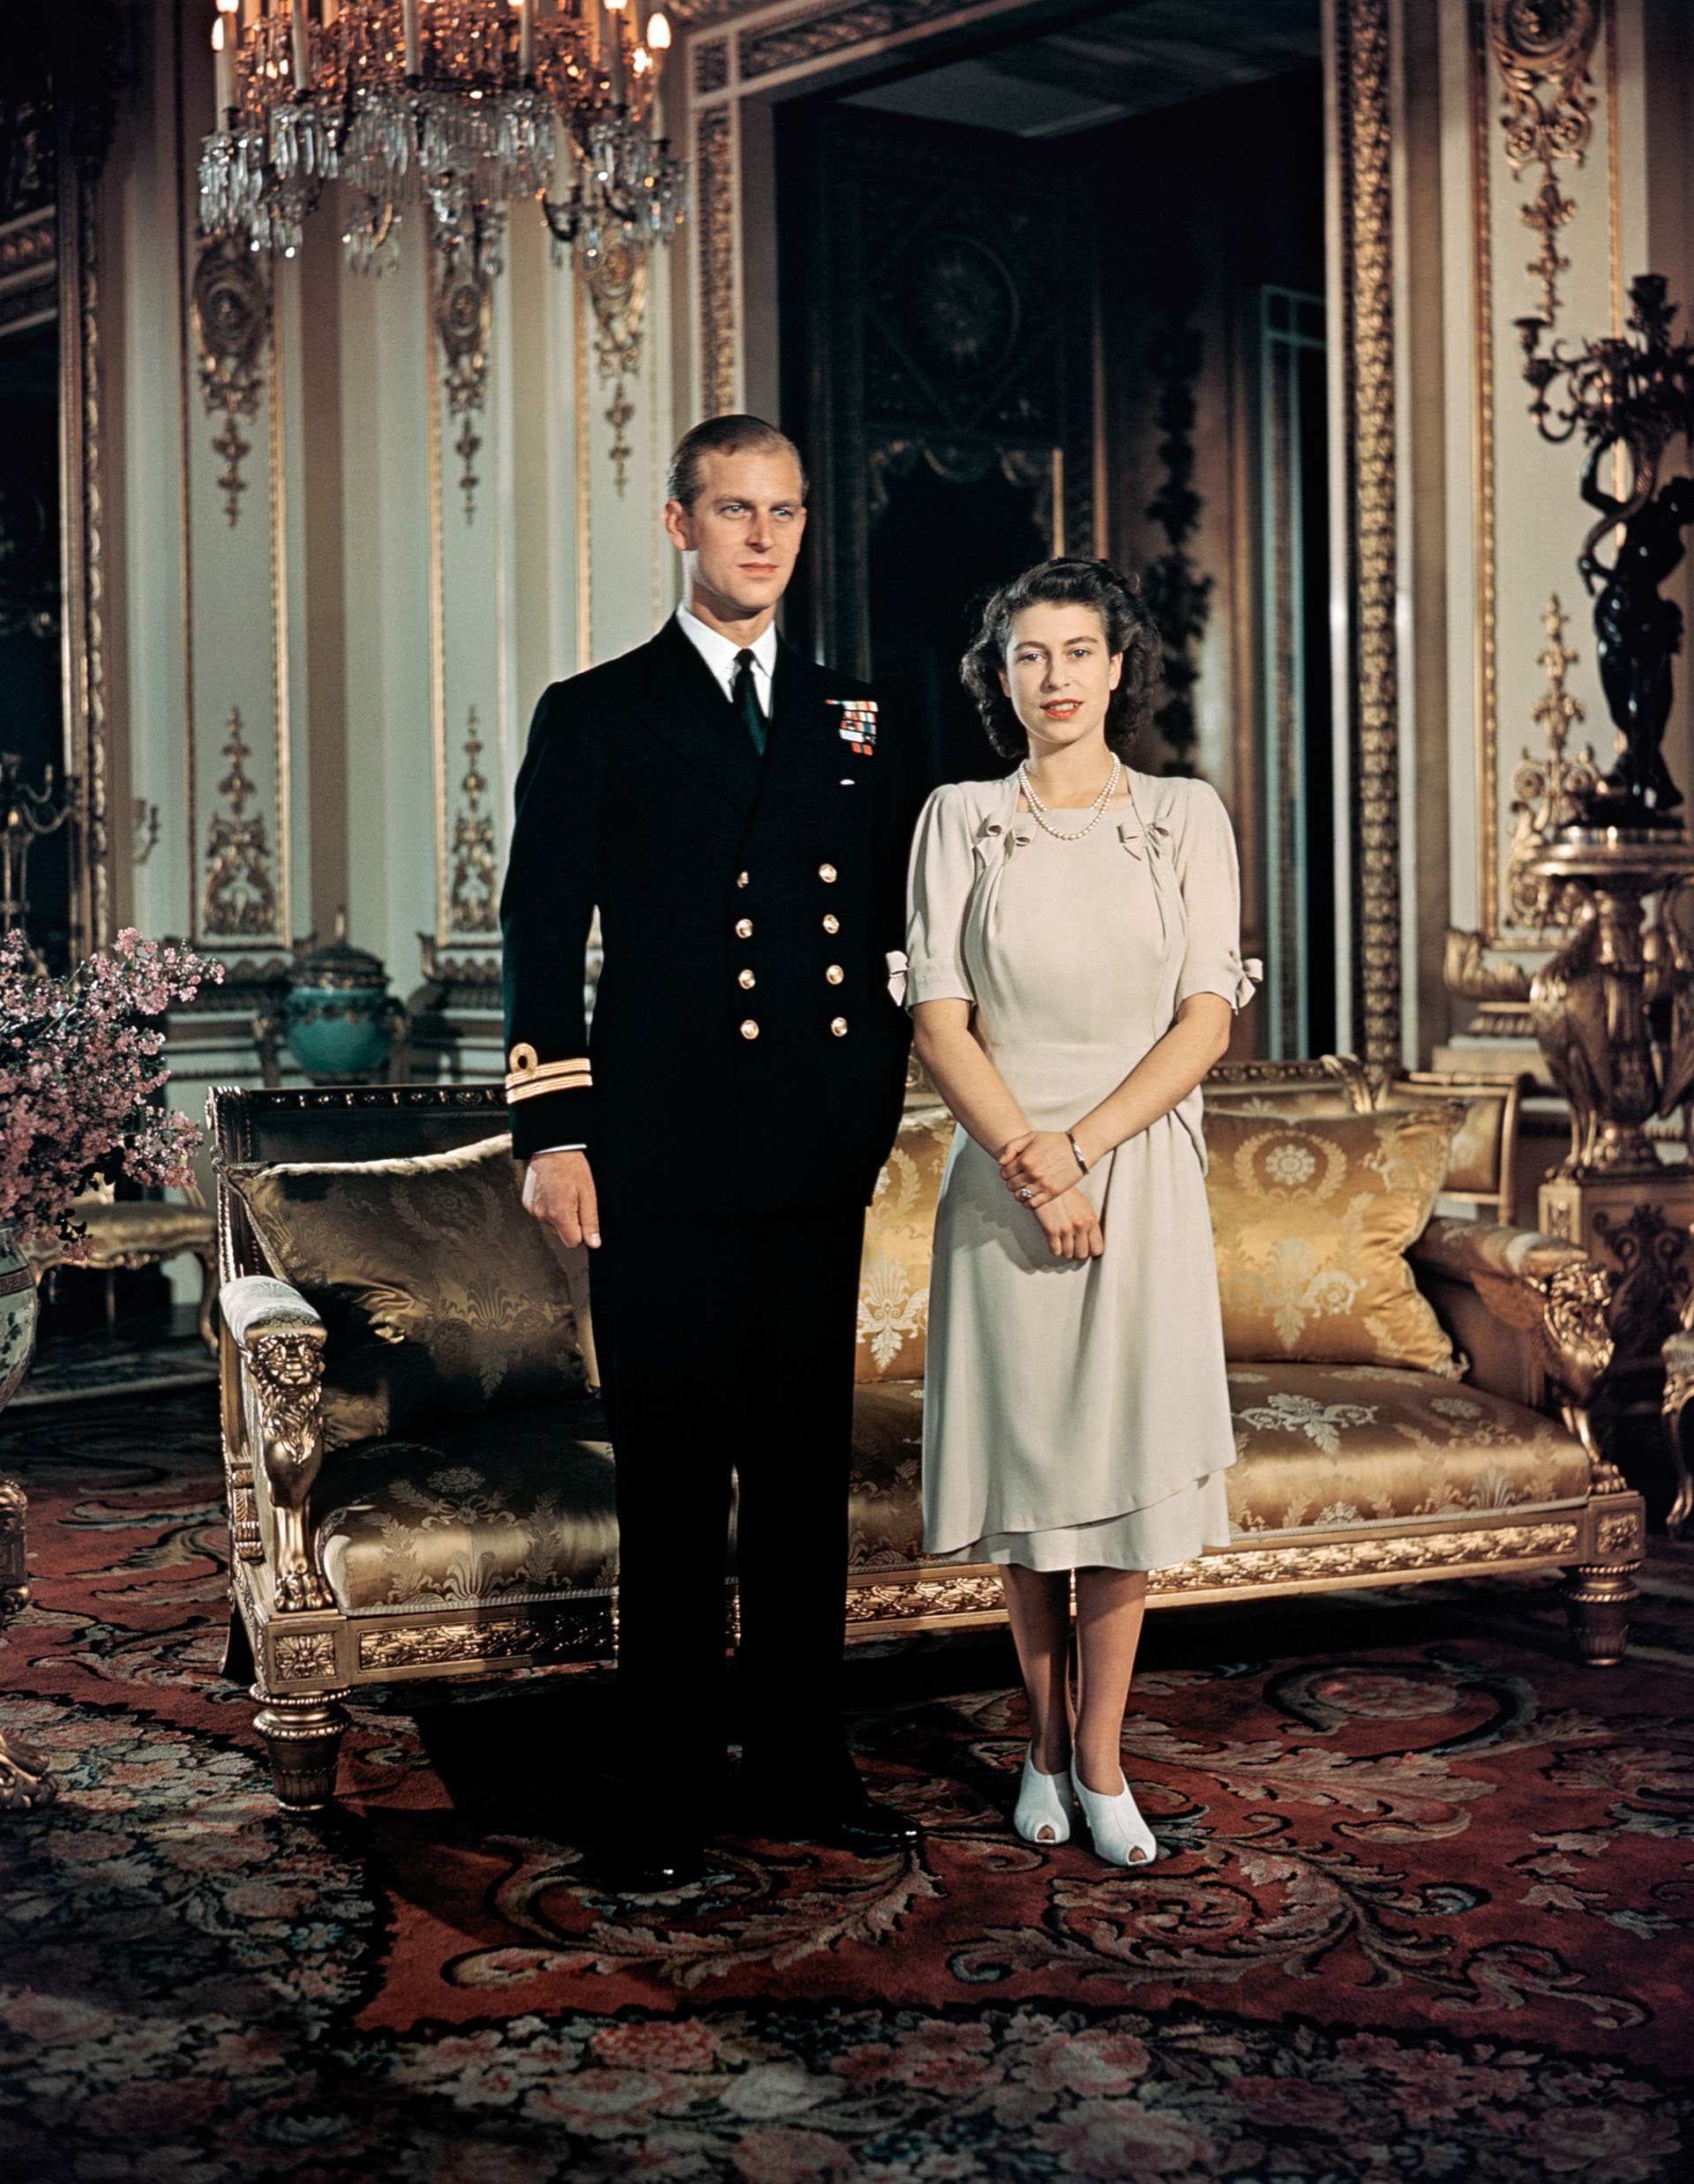 Princess Elizabeth stands with fiancee Lieutenant Philip Mountbatten, Prince of Greece and Denmark.